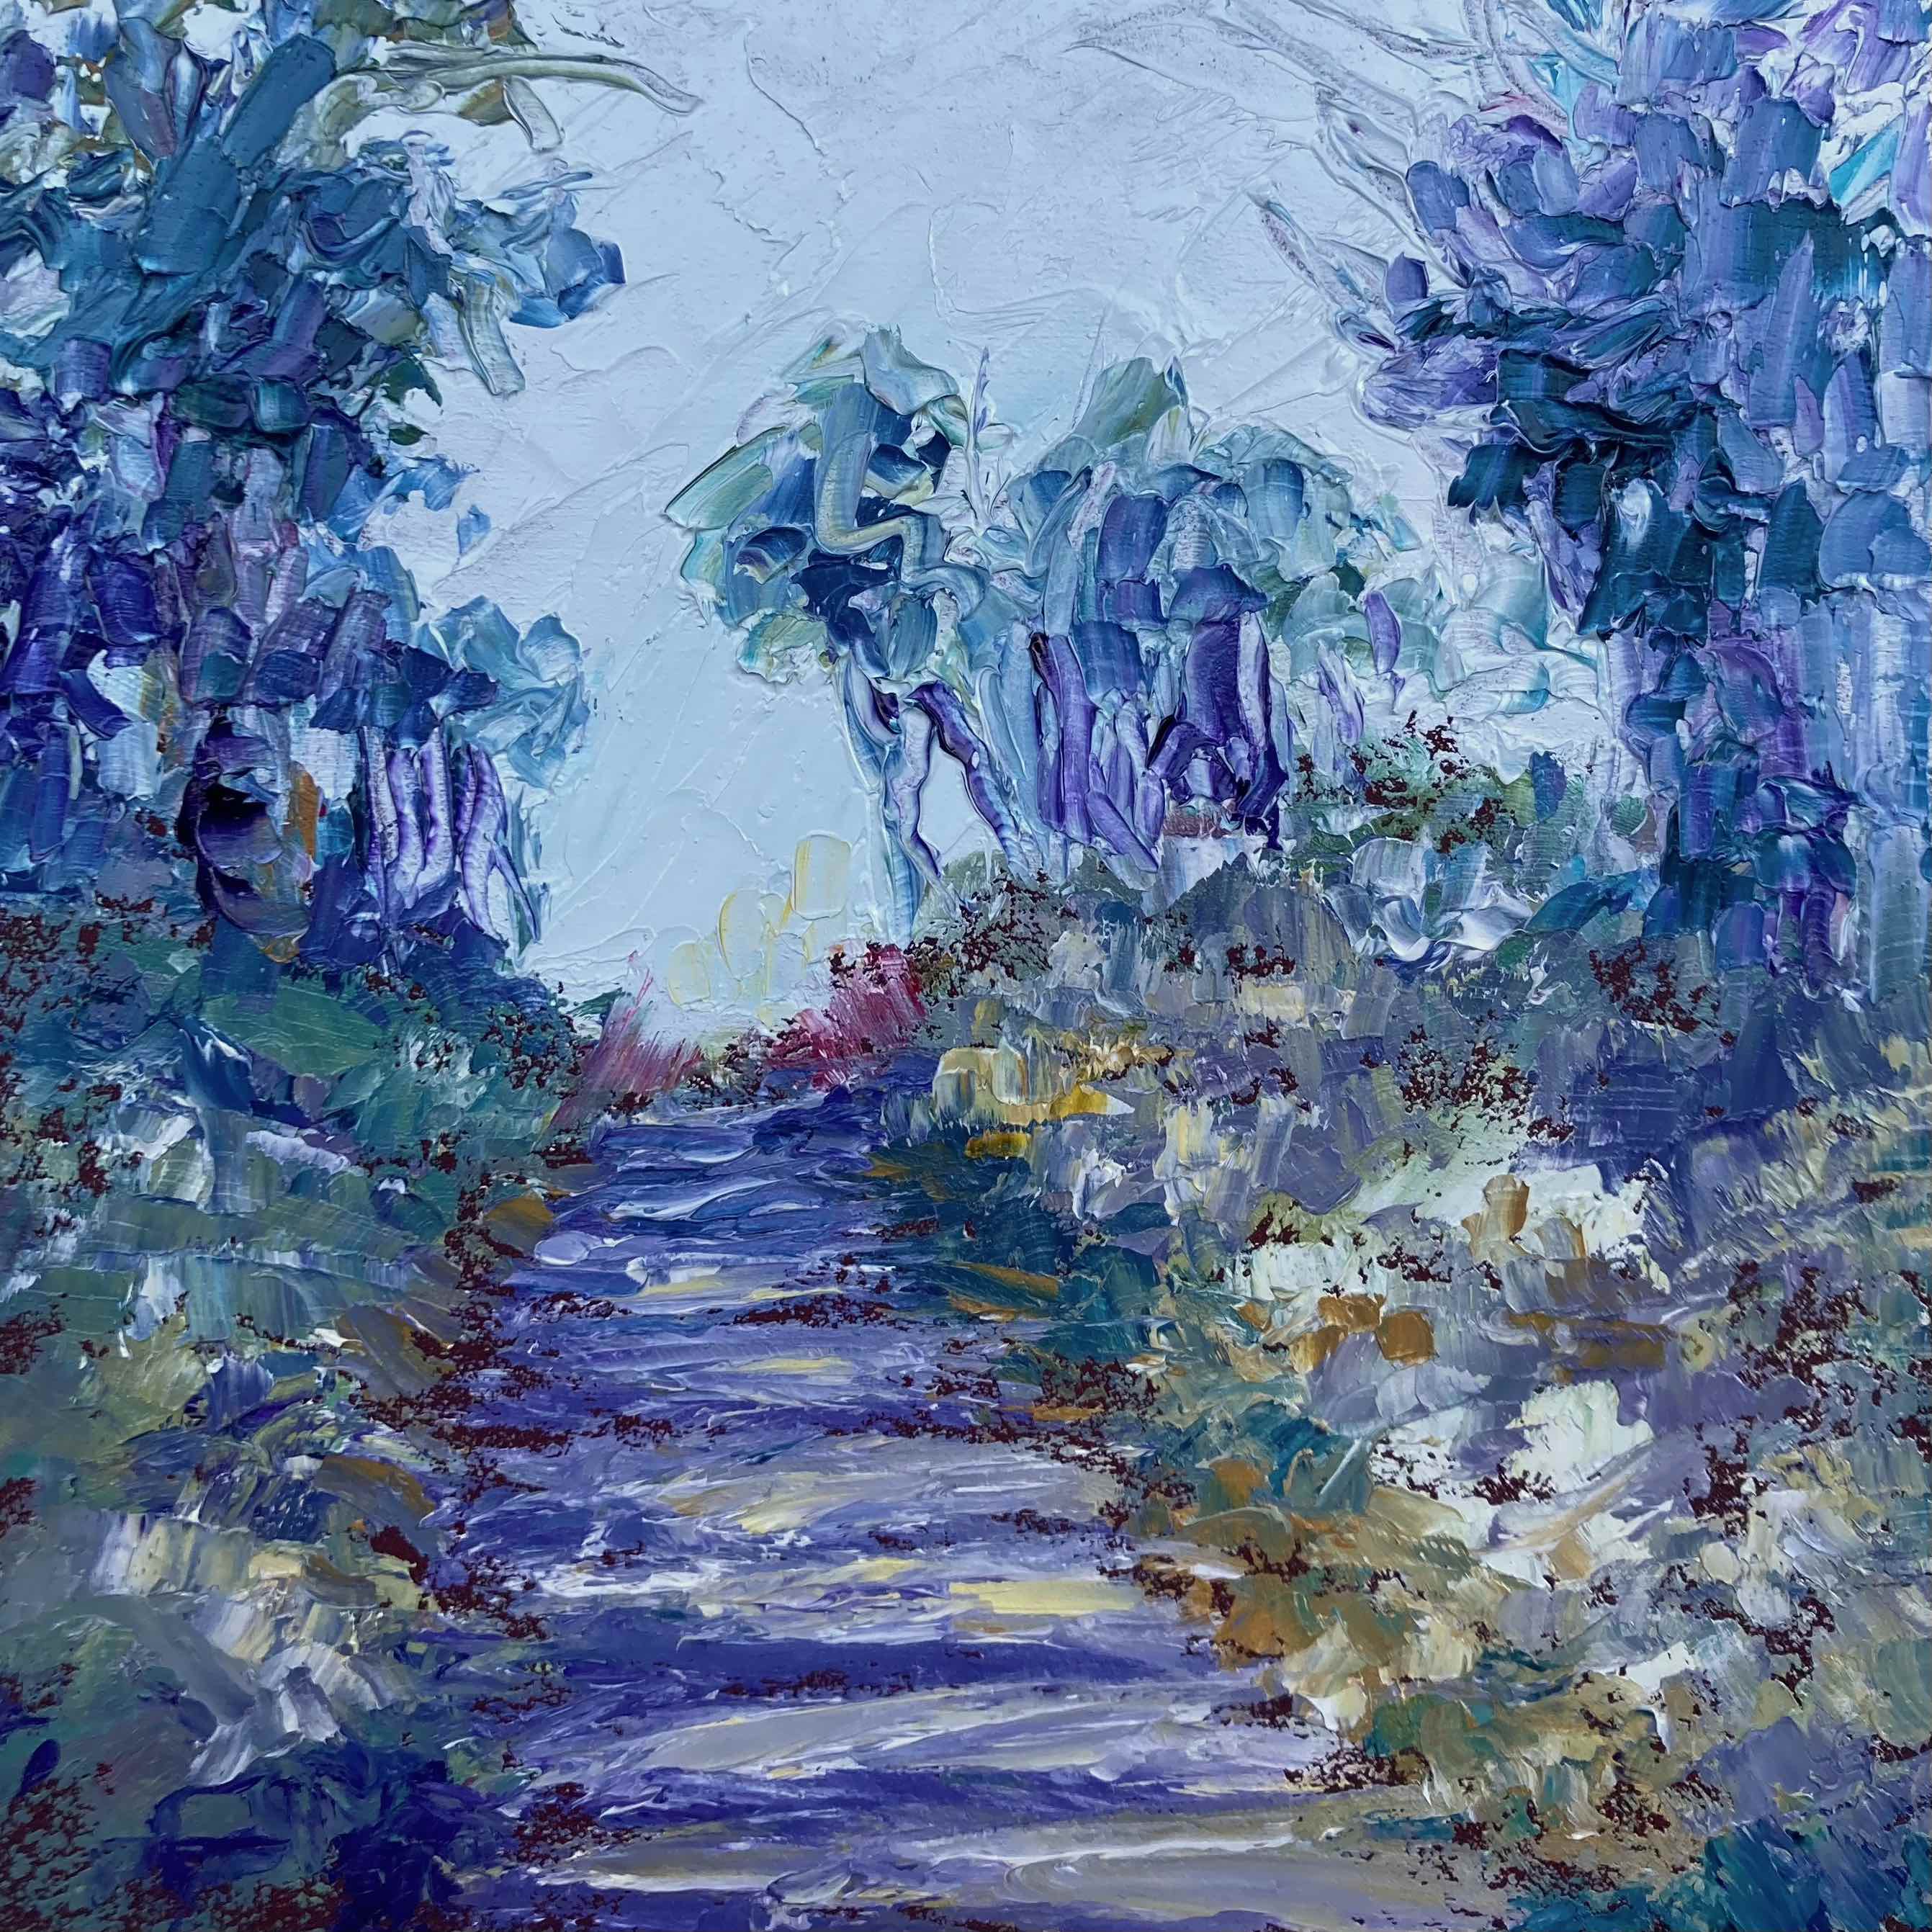 Alla Prima, Impressionistic, palette knife oil painting of Steps, Shrubs, trees and sky by Shannon Grissom